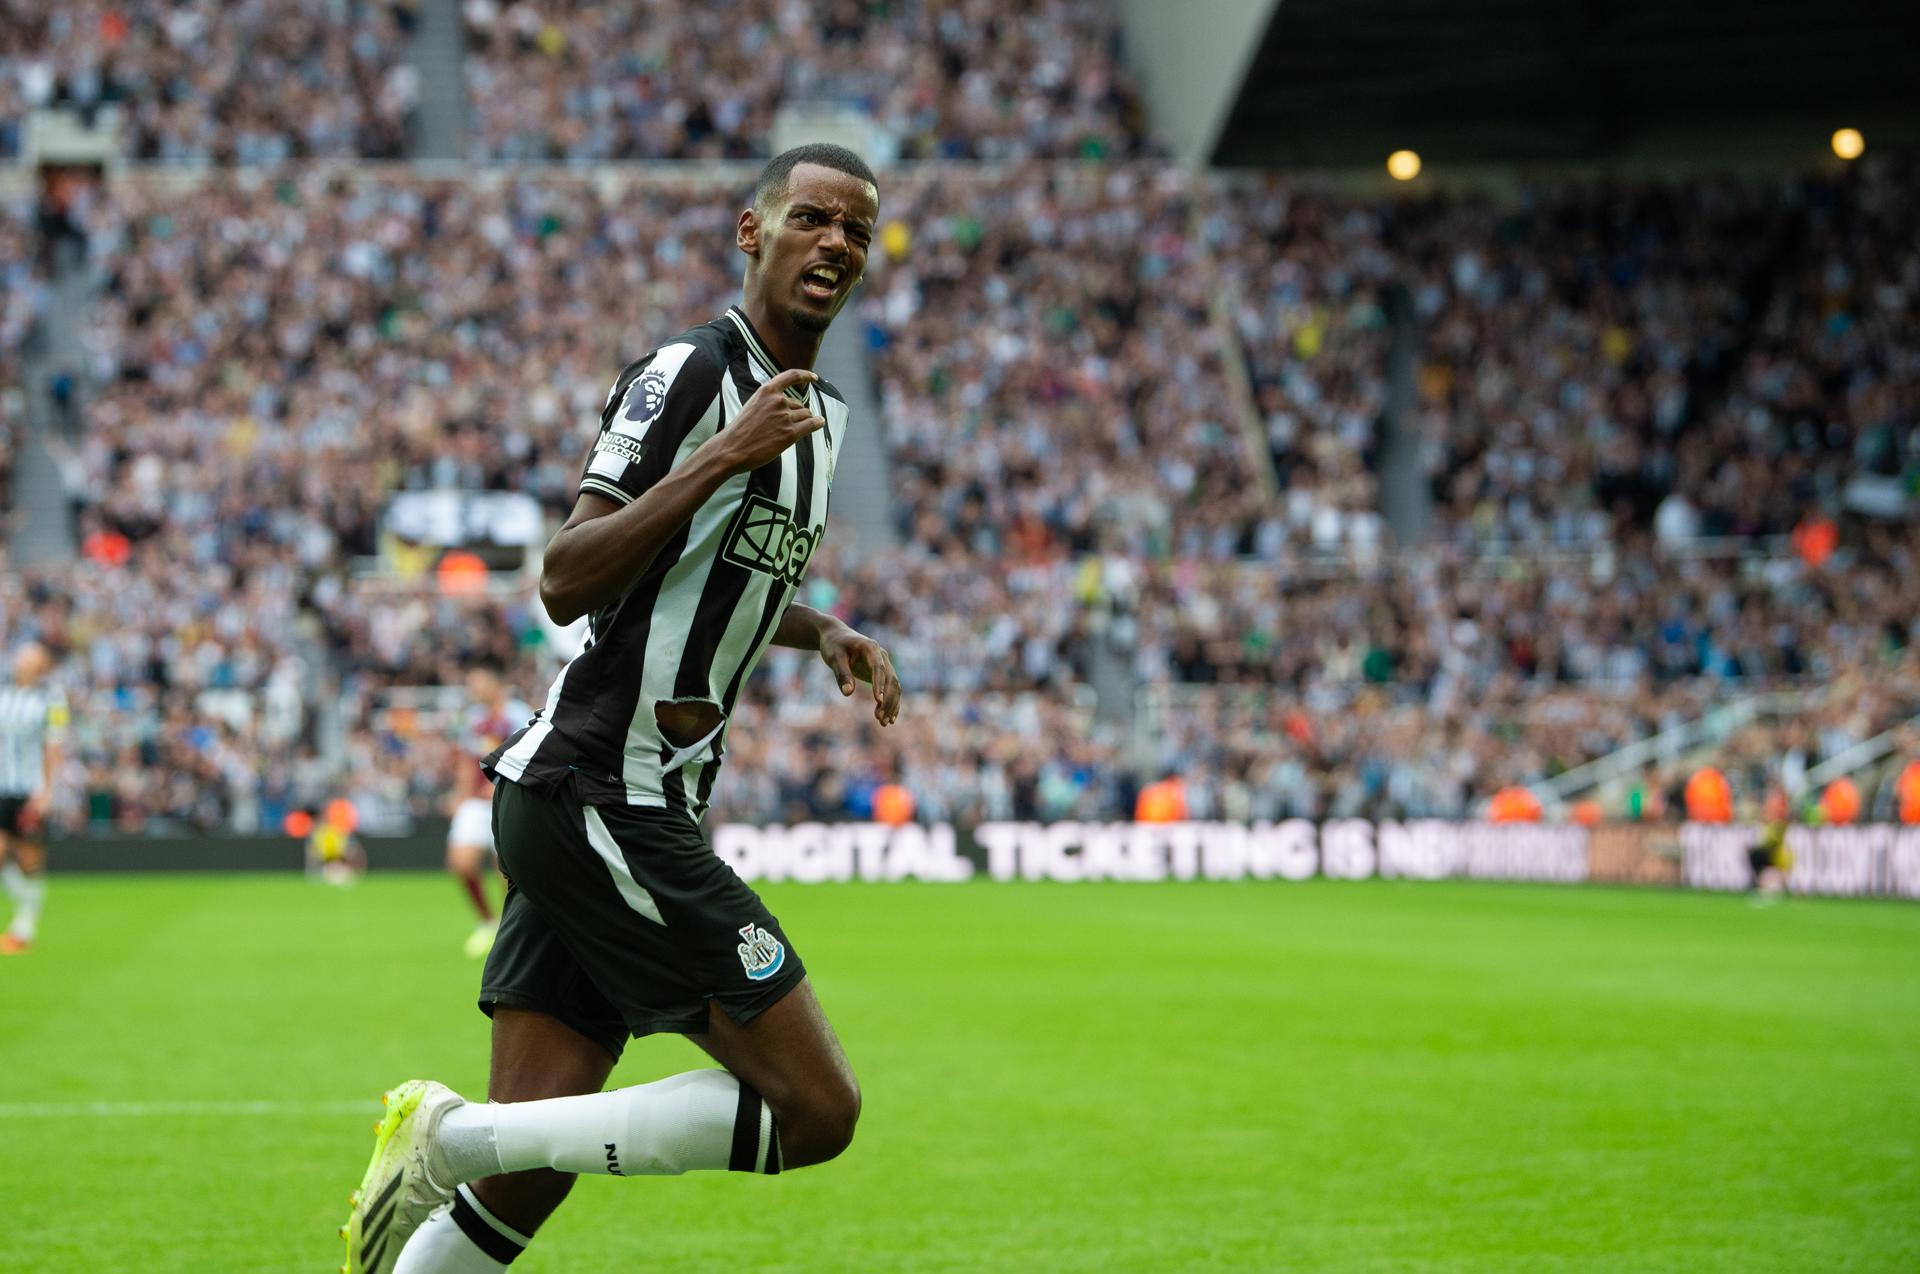 Newcastle United's Alexander Isak celebrates one of the two goals he scored in Premier League action at St. James' Park in Newcastle, United Kingdom, against Aston Villa on 12 August 2023. Newcastle won 5-1. EFE/EPA/PETER POWELL.
